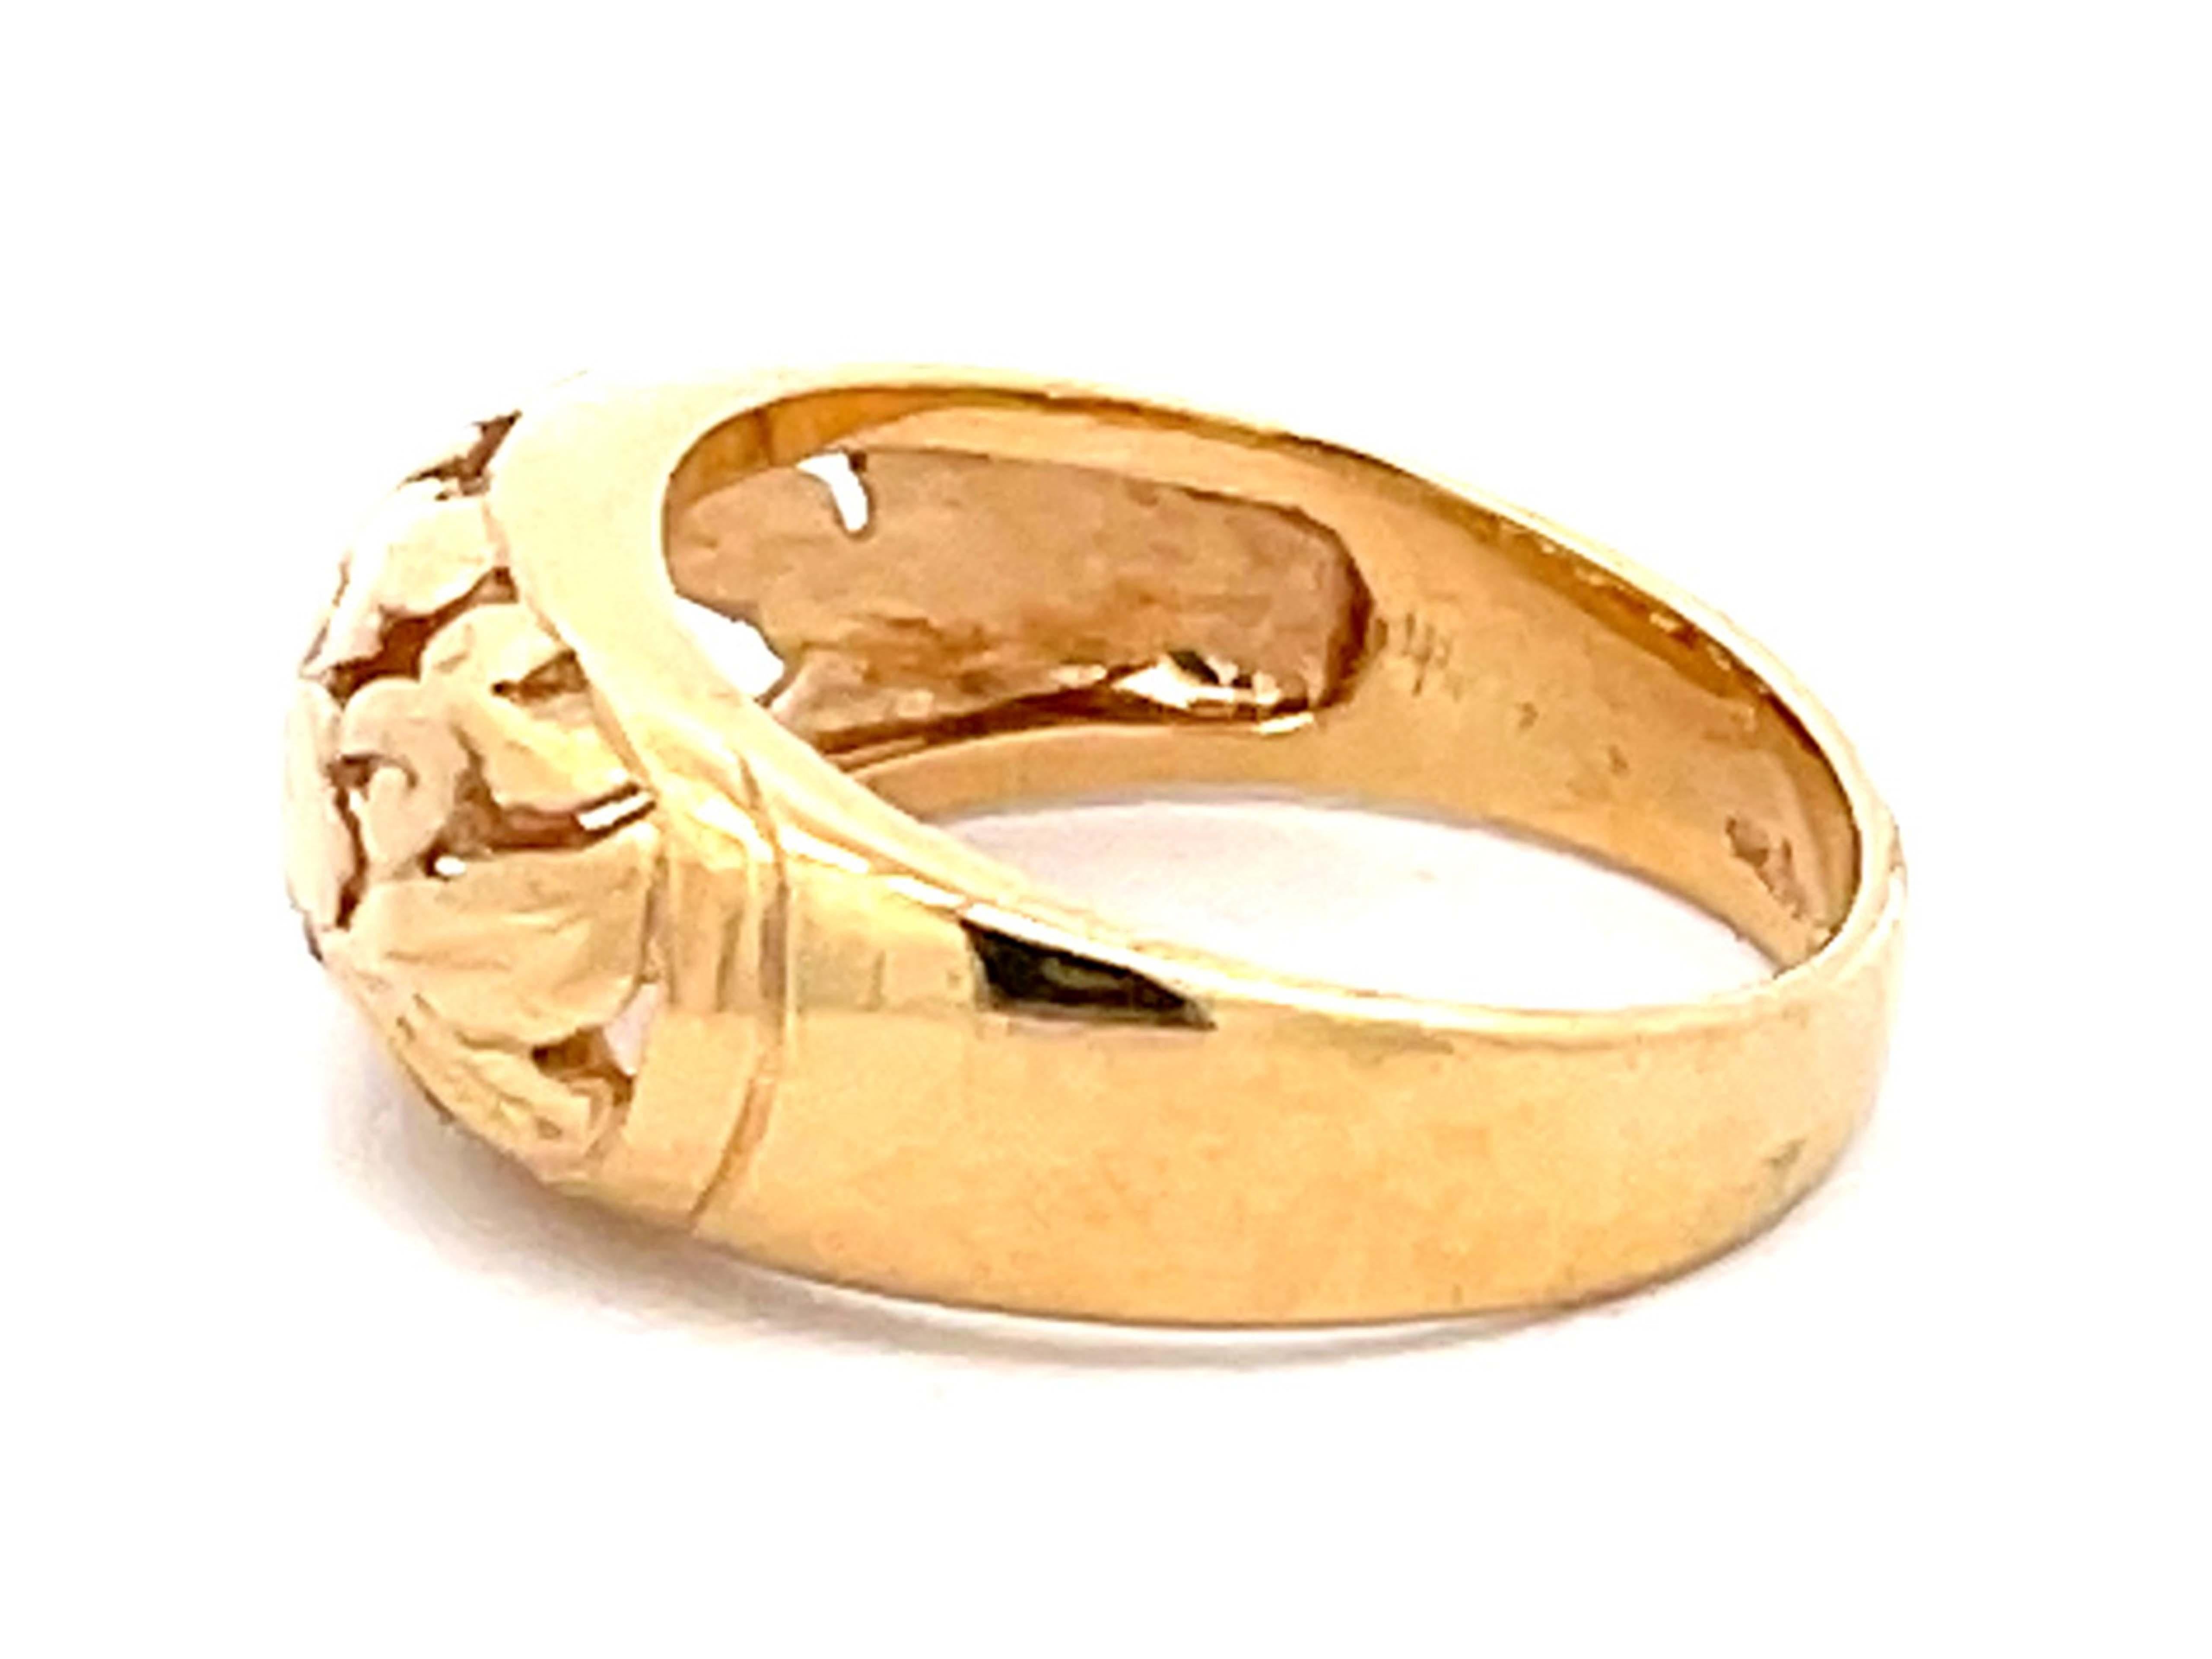 Mings Chrysanthemum Cutout Band Ring in 14k Yellow Gold In Excellent Condition For Sale In Honolulu, HI